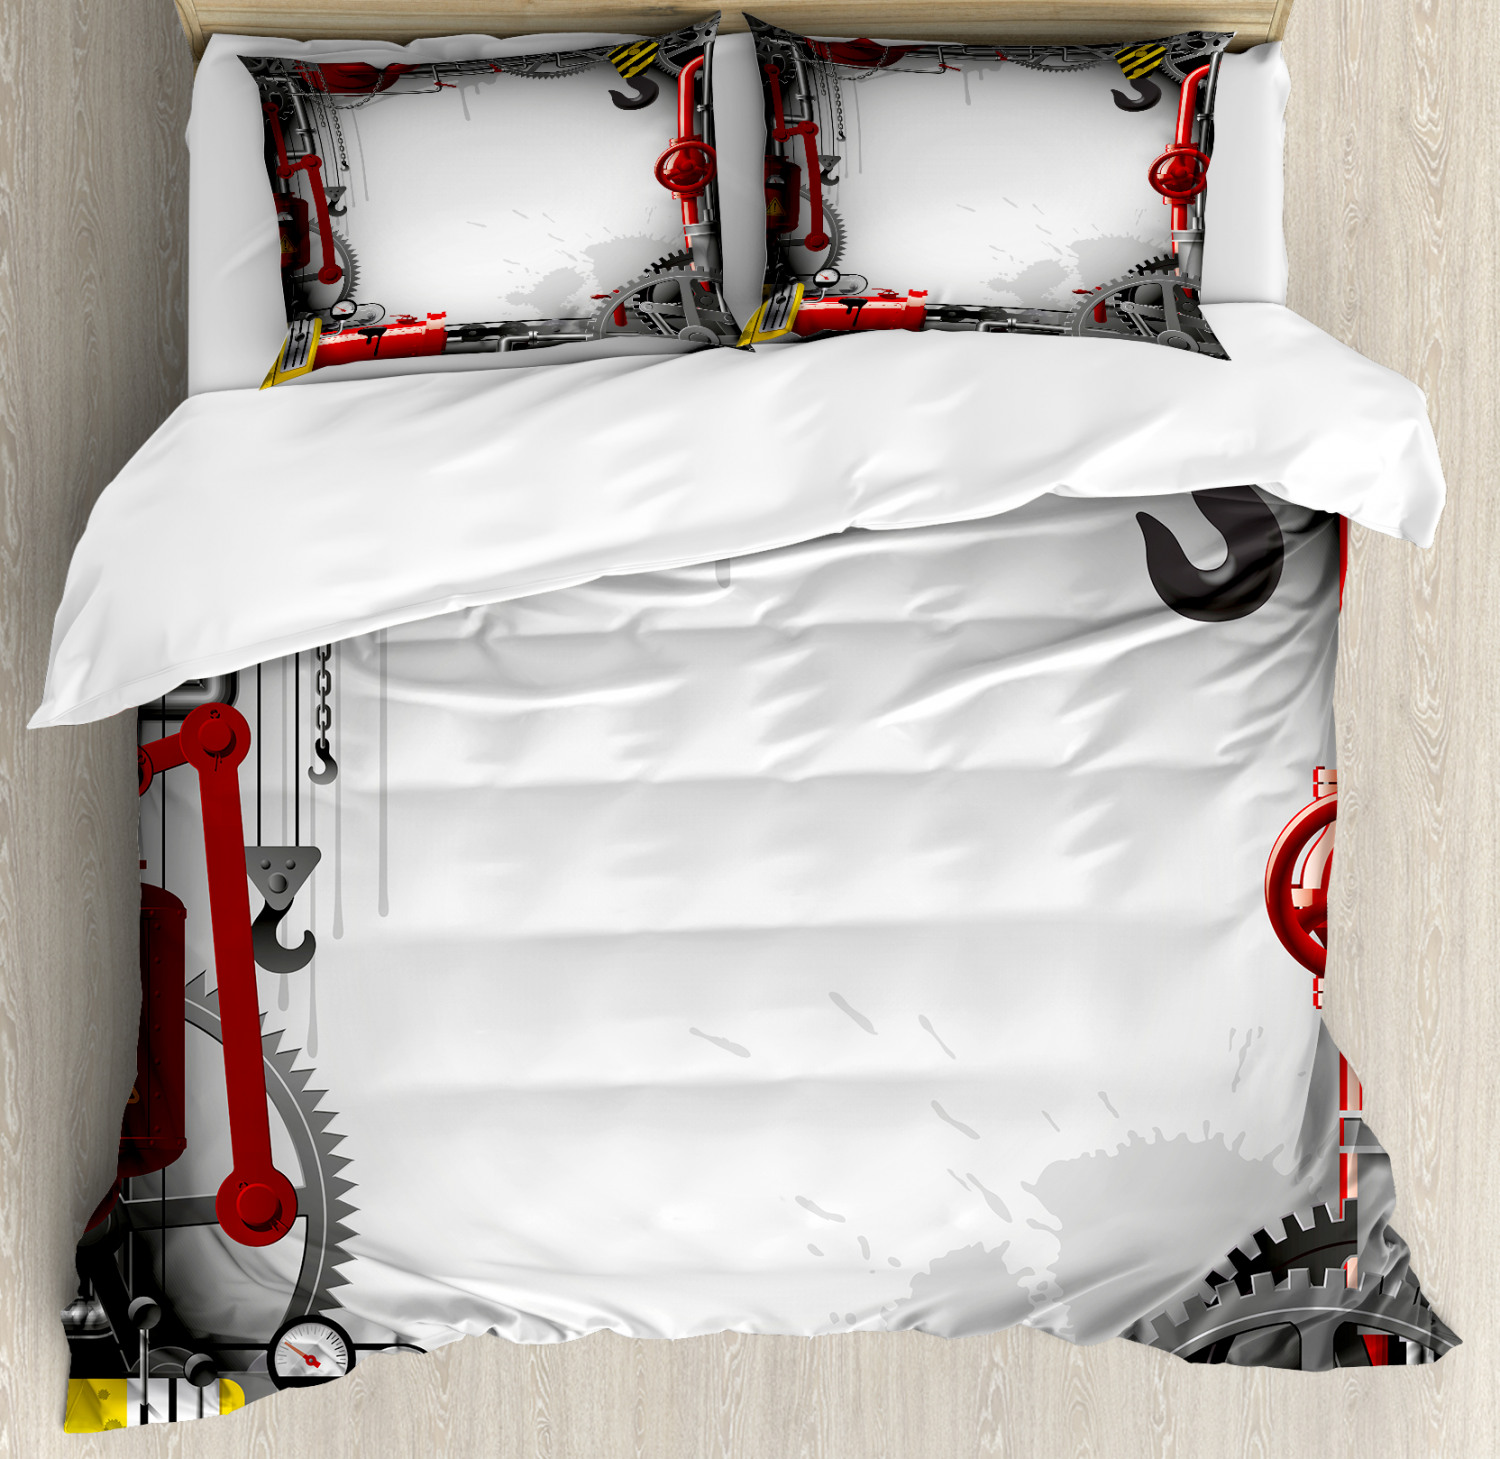 Industrial Duvet Cover Set with Pillow Shams Steam Pipes Print 